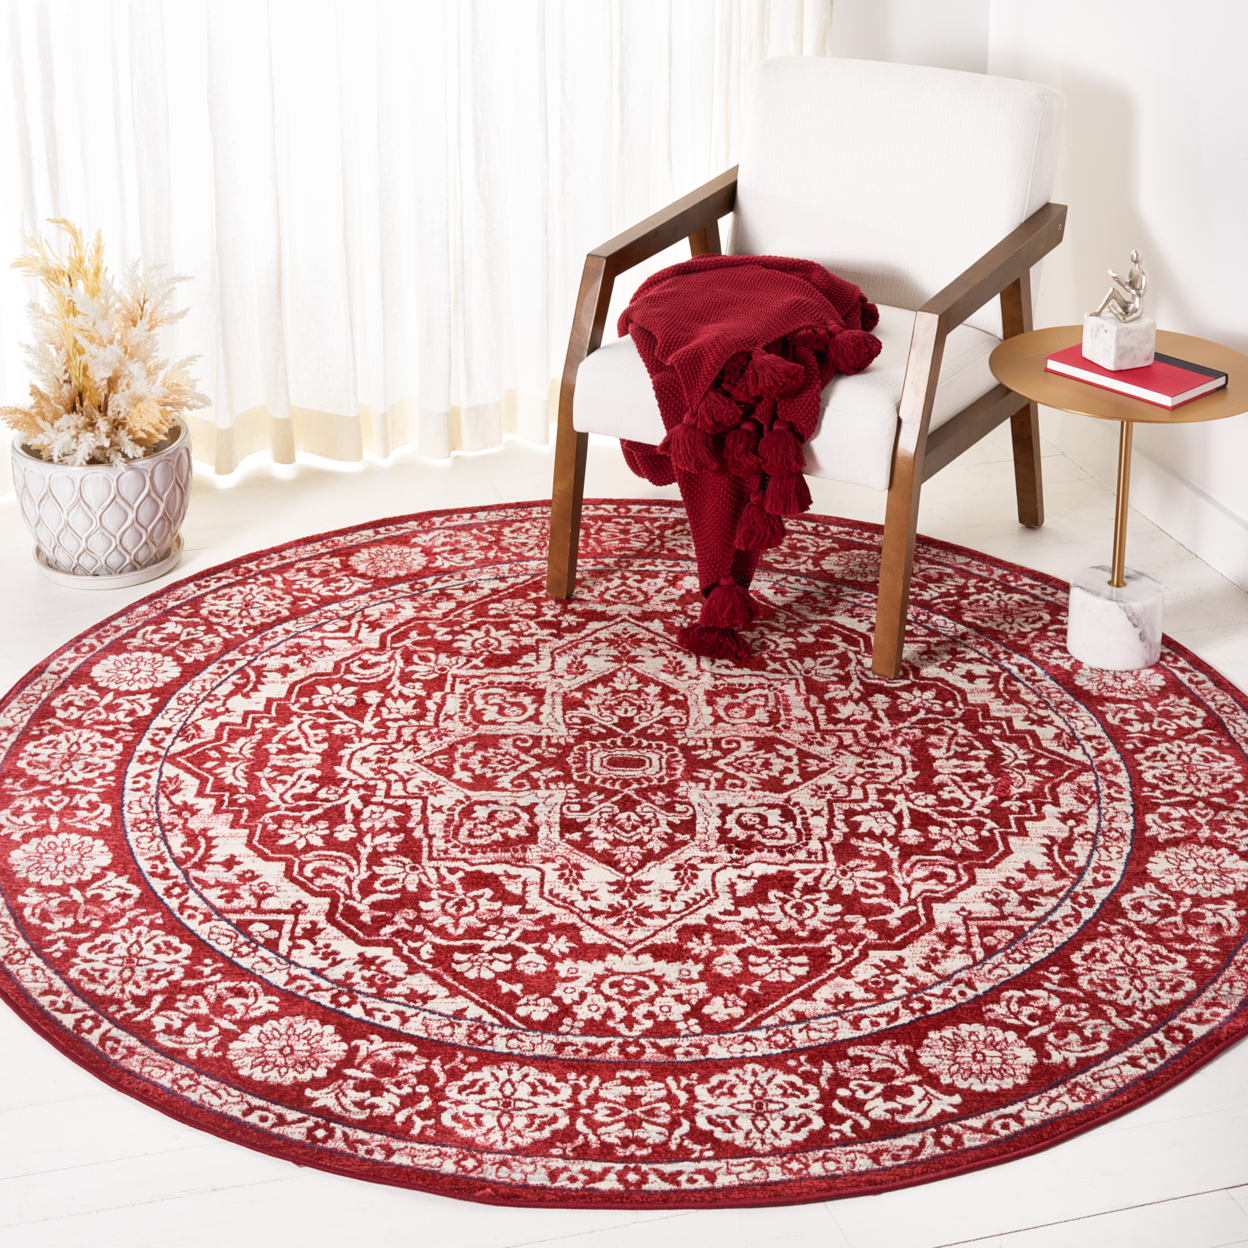 SAFAVIEH Brentwood Collection BNT832Q Red / Ivory Rug - 6-7 X 6-7 Square